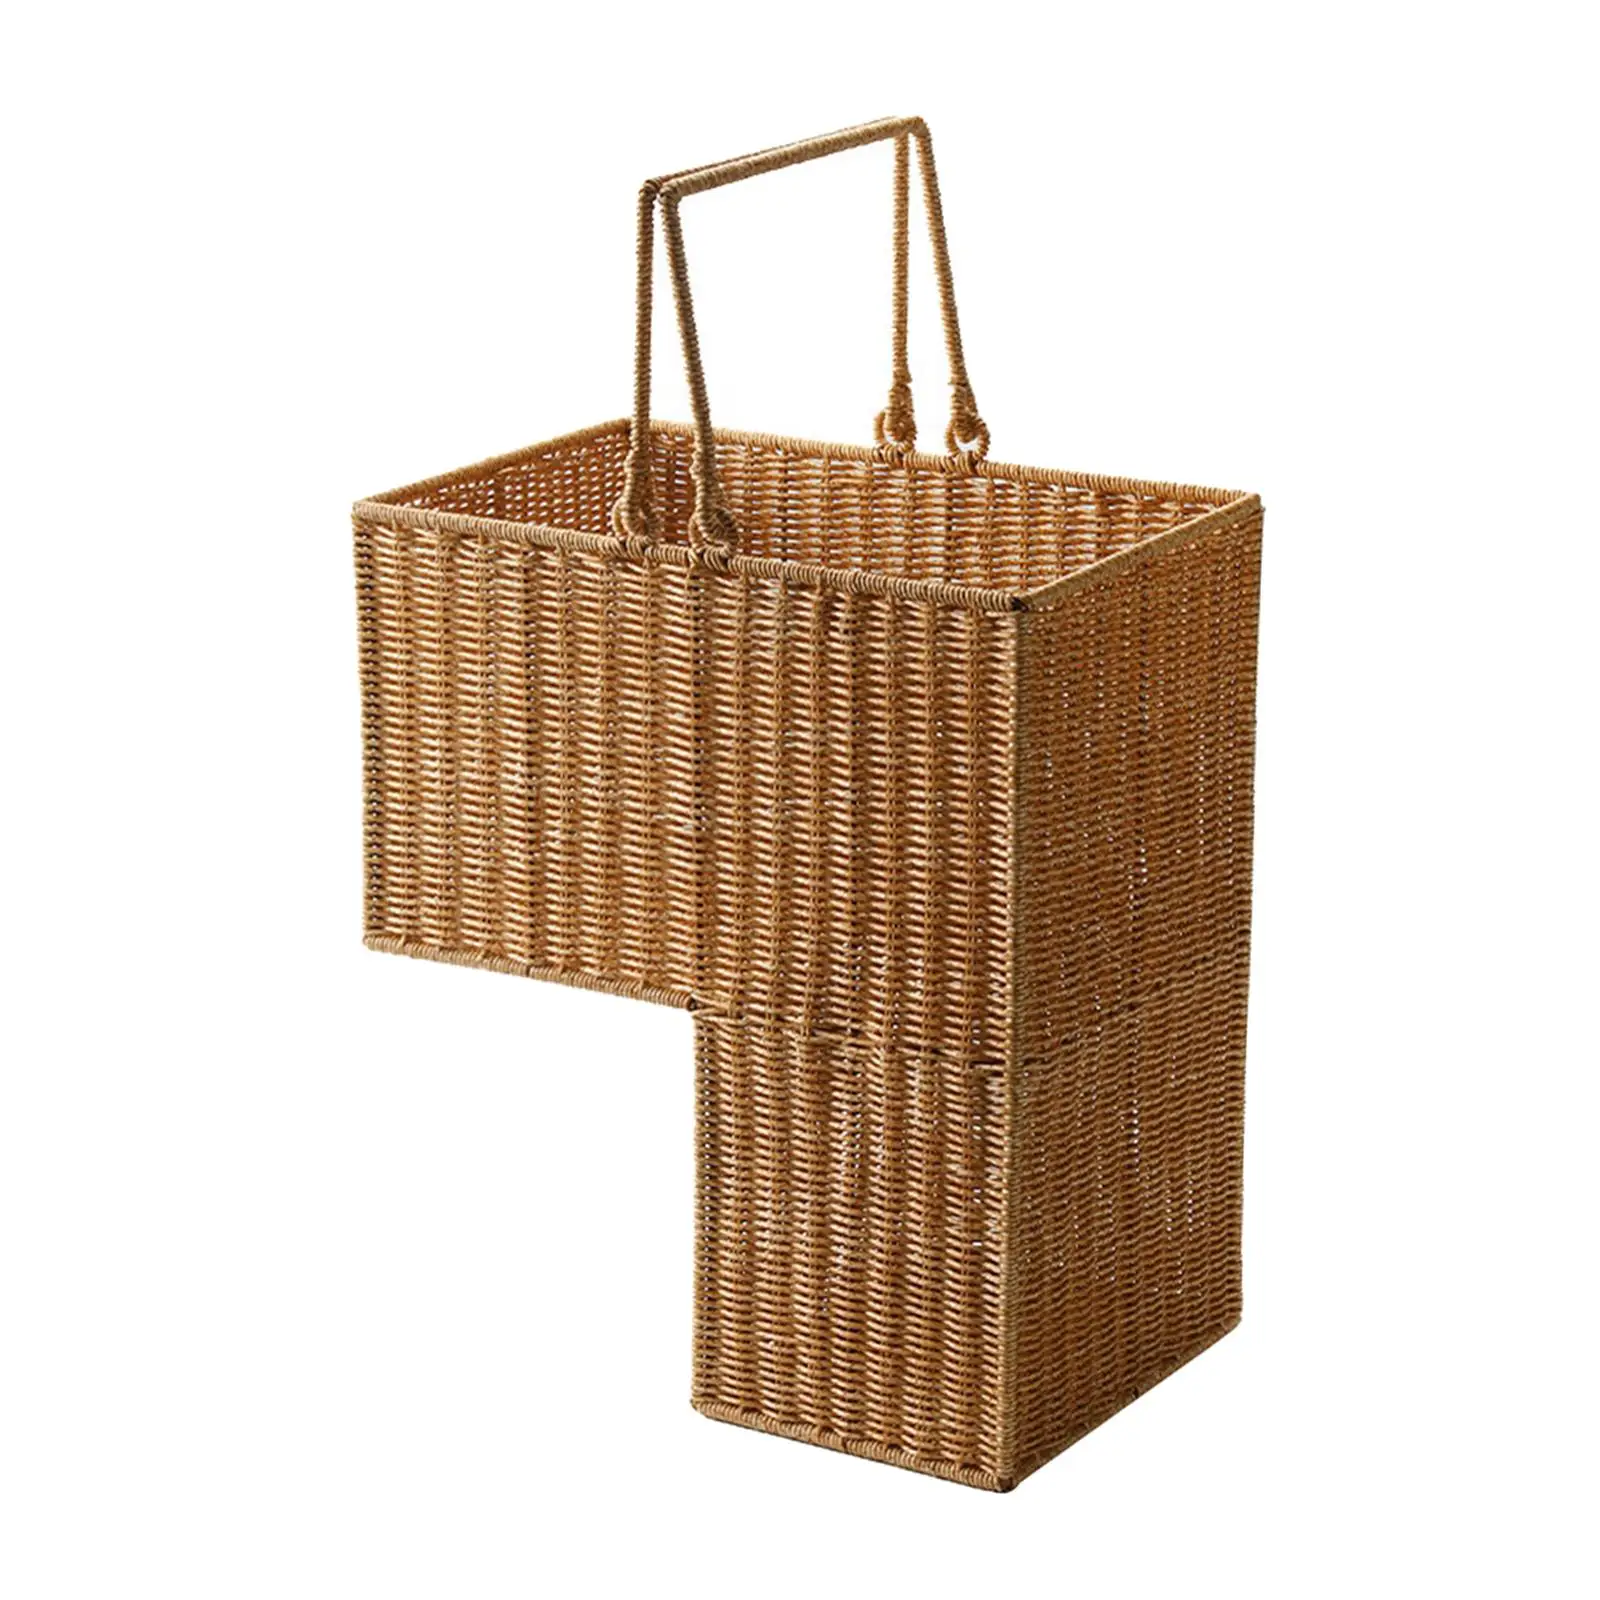 Stair Step Basket Sundries Organizer Multifunctional with Handle Handwoven for Cosmetics Books Home Decorative Patio Bedroom